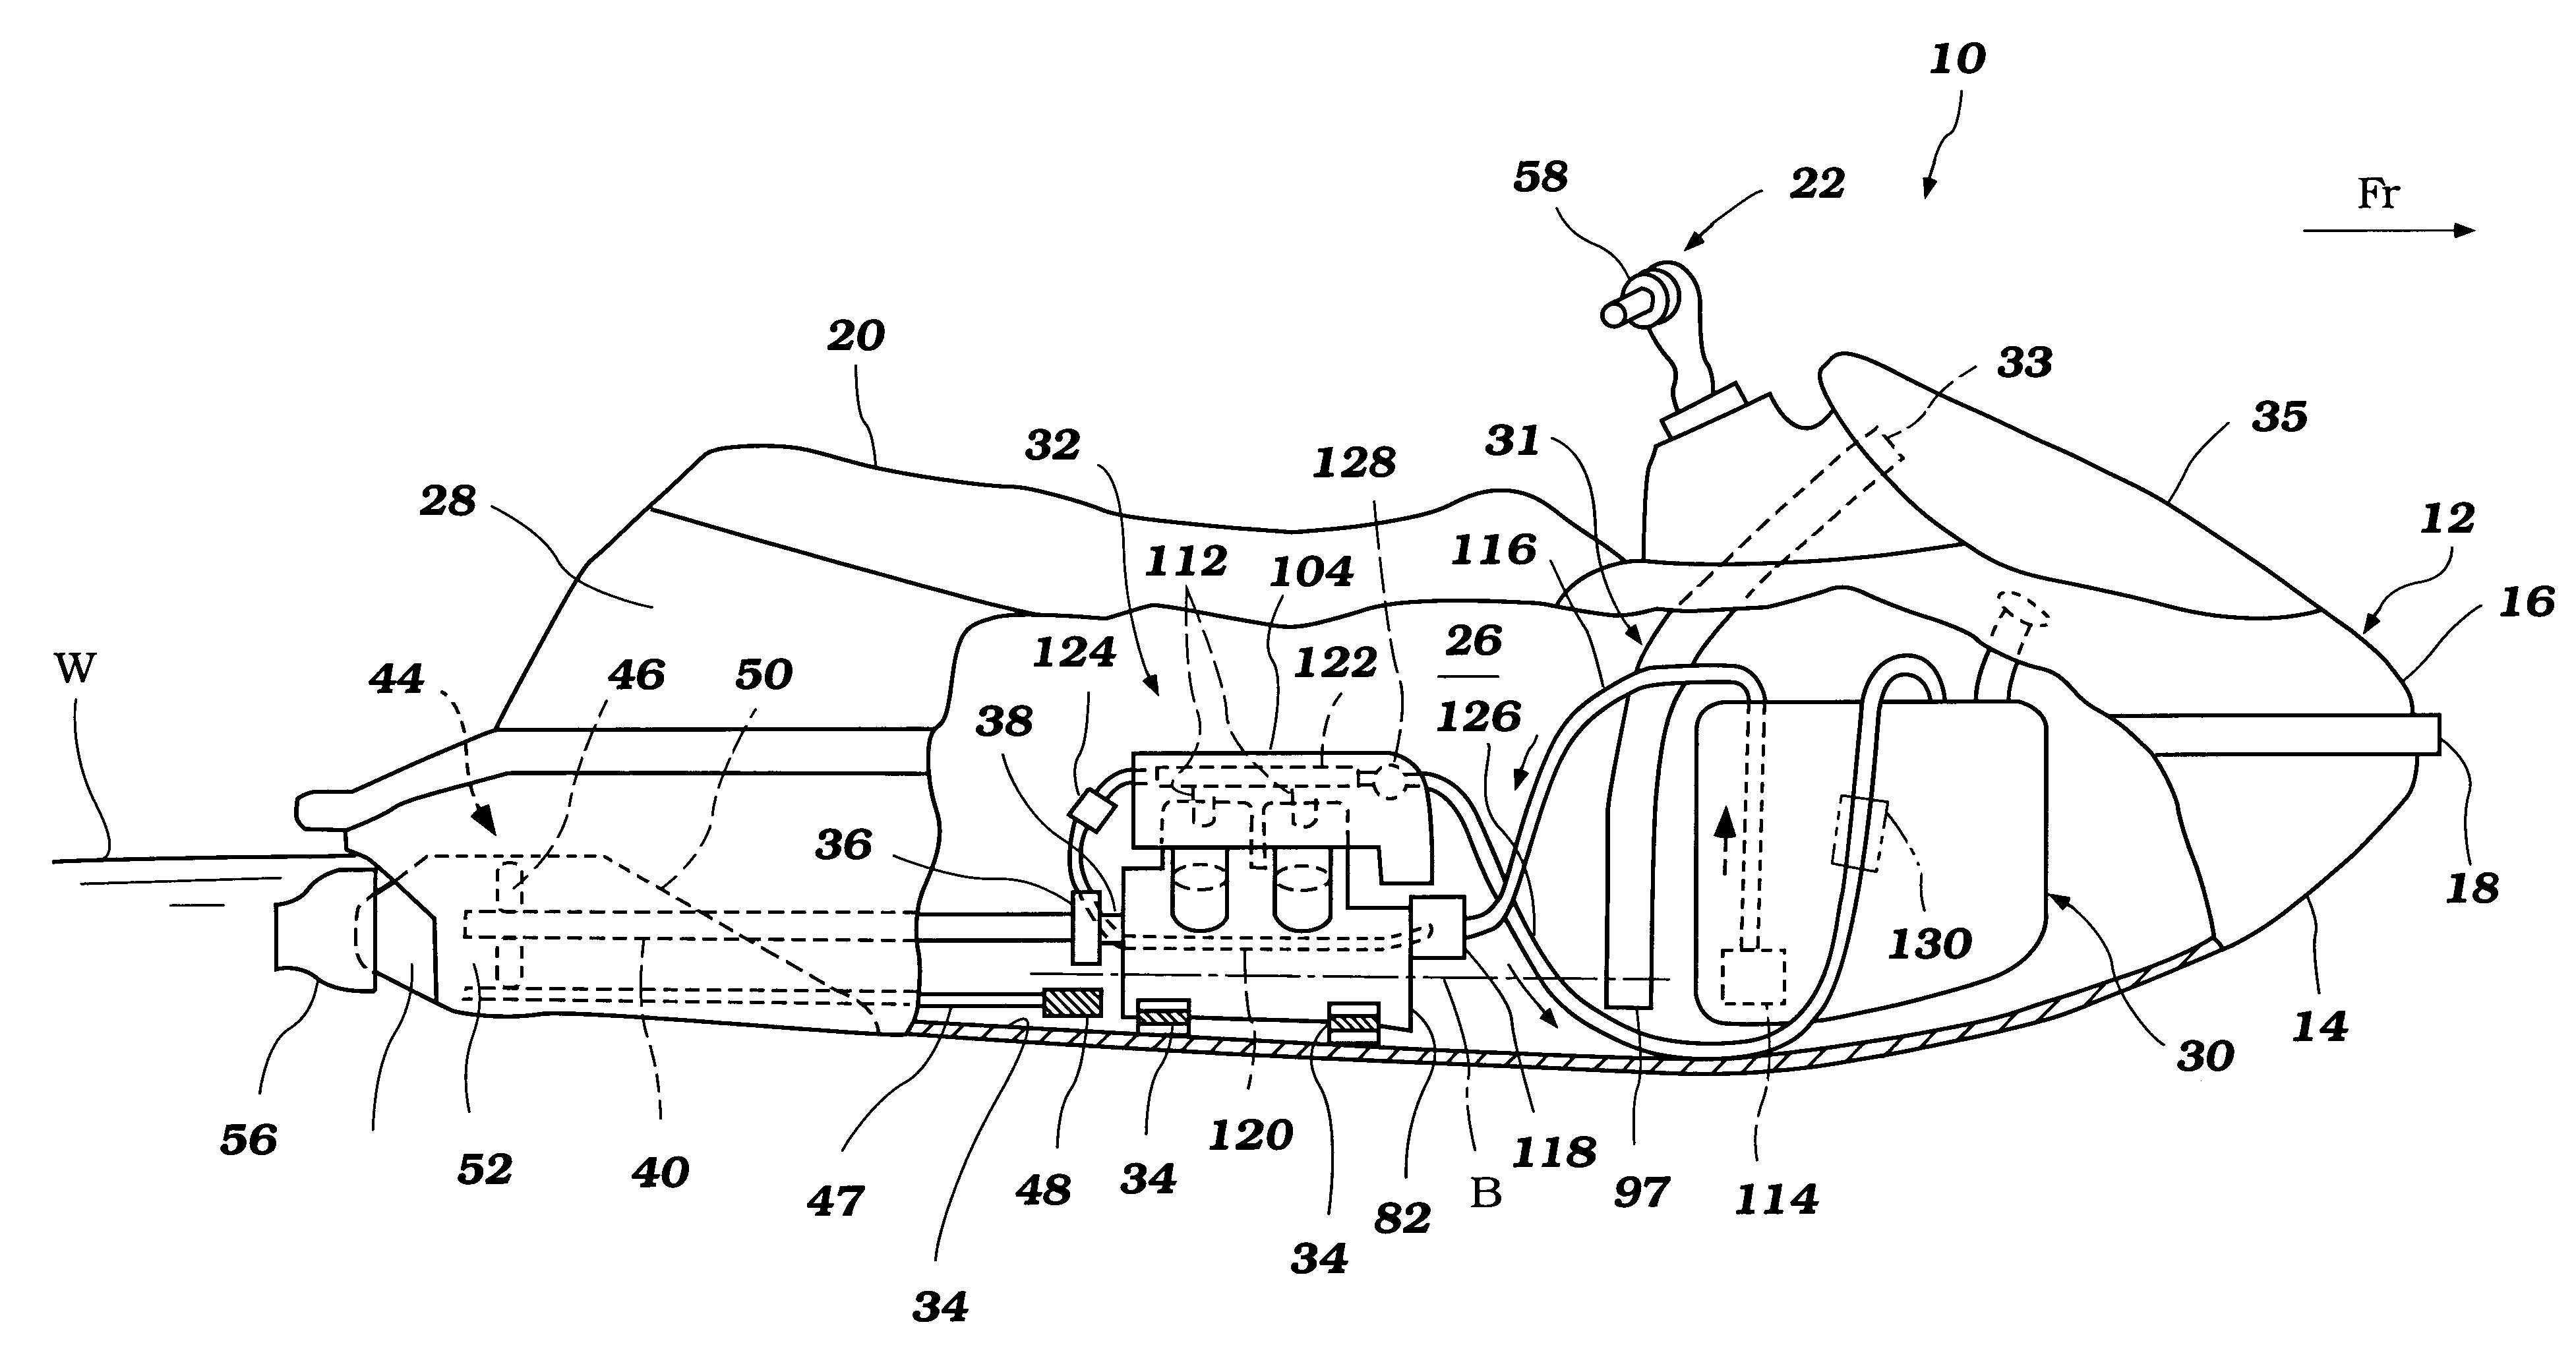 Fuel system and arrangement for small watercraft